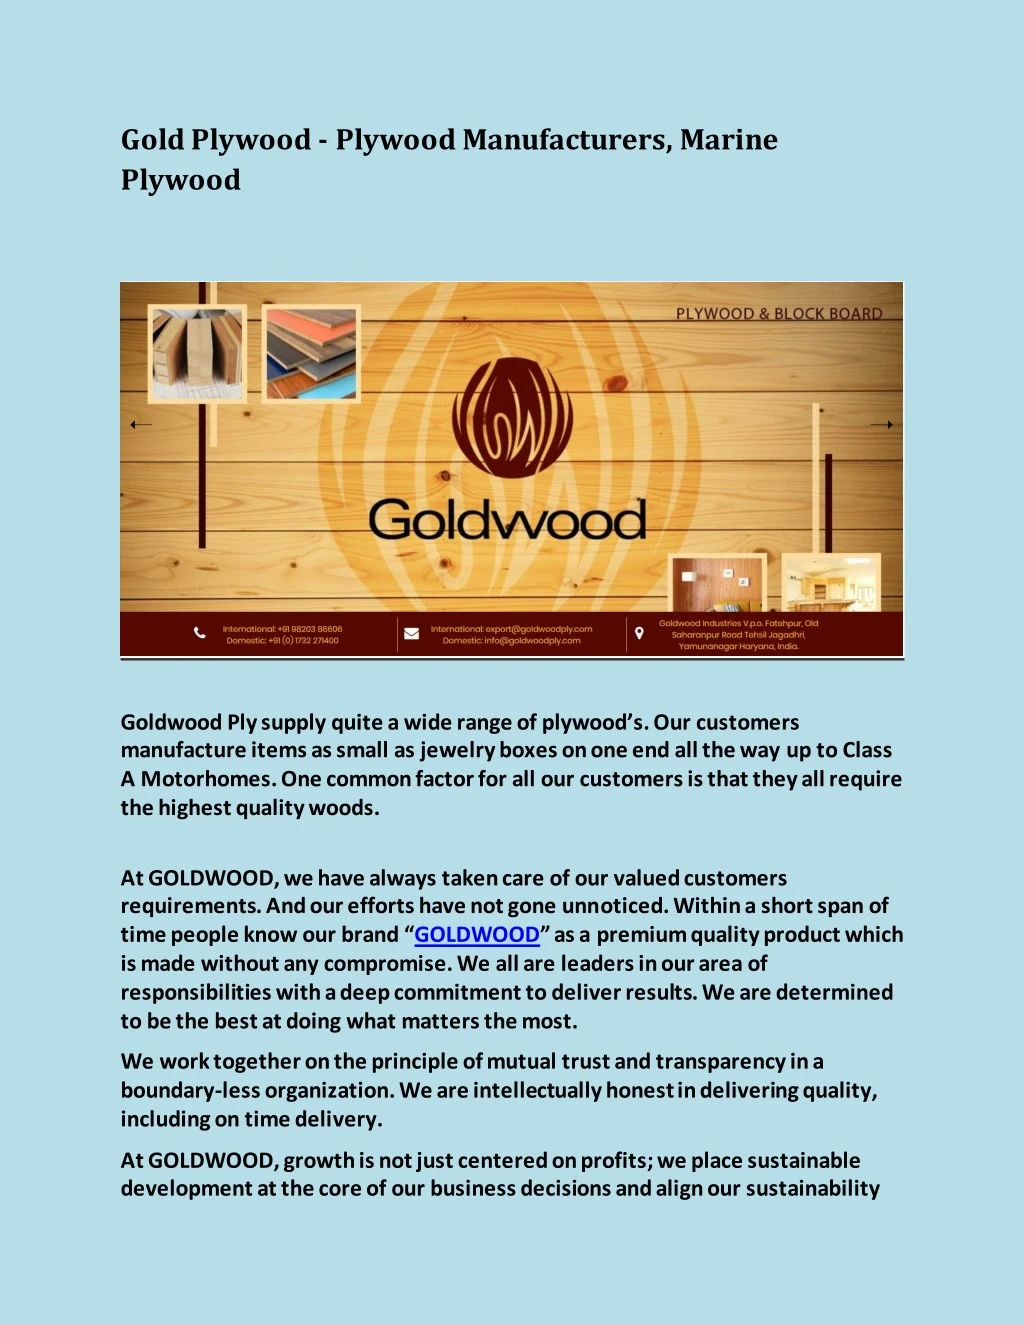 gold plywood plywood manufacturers marine plywood